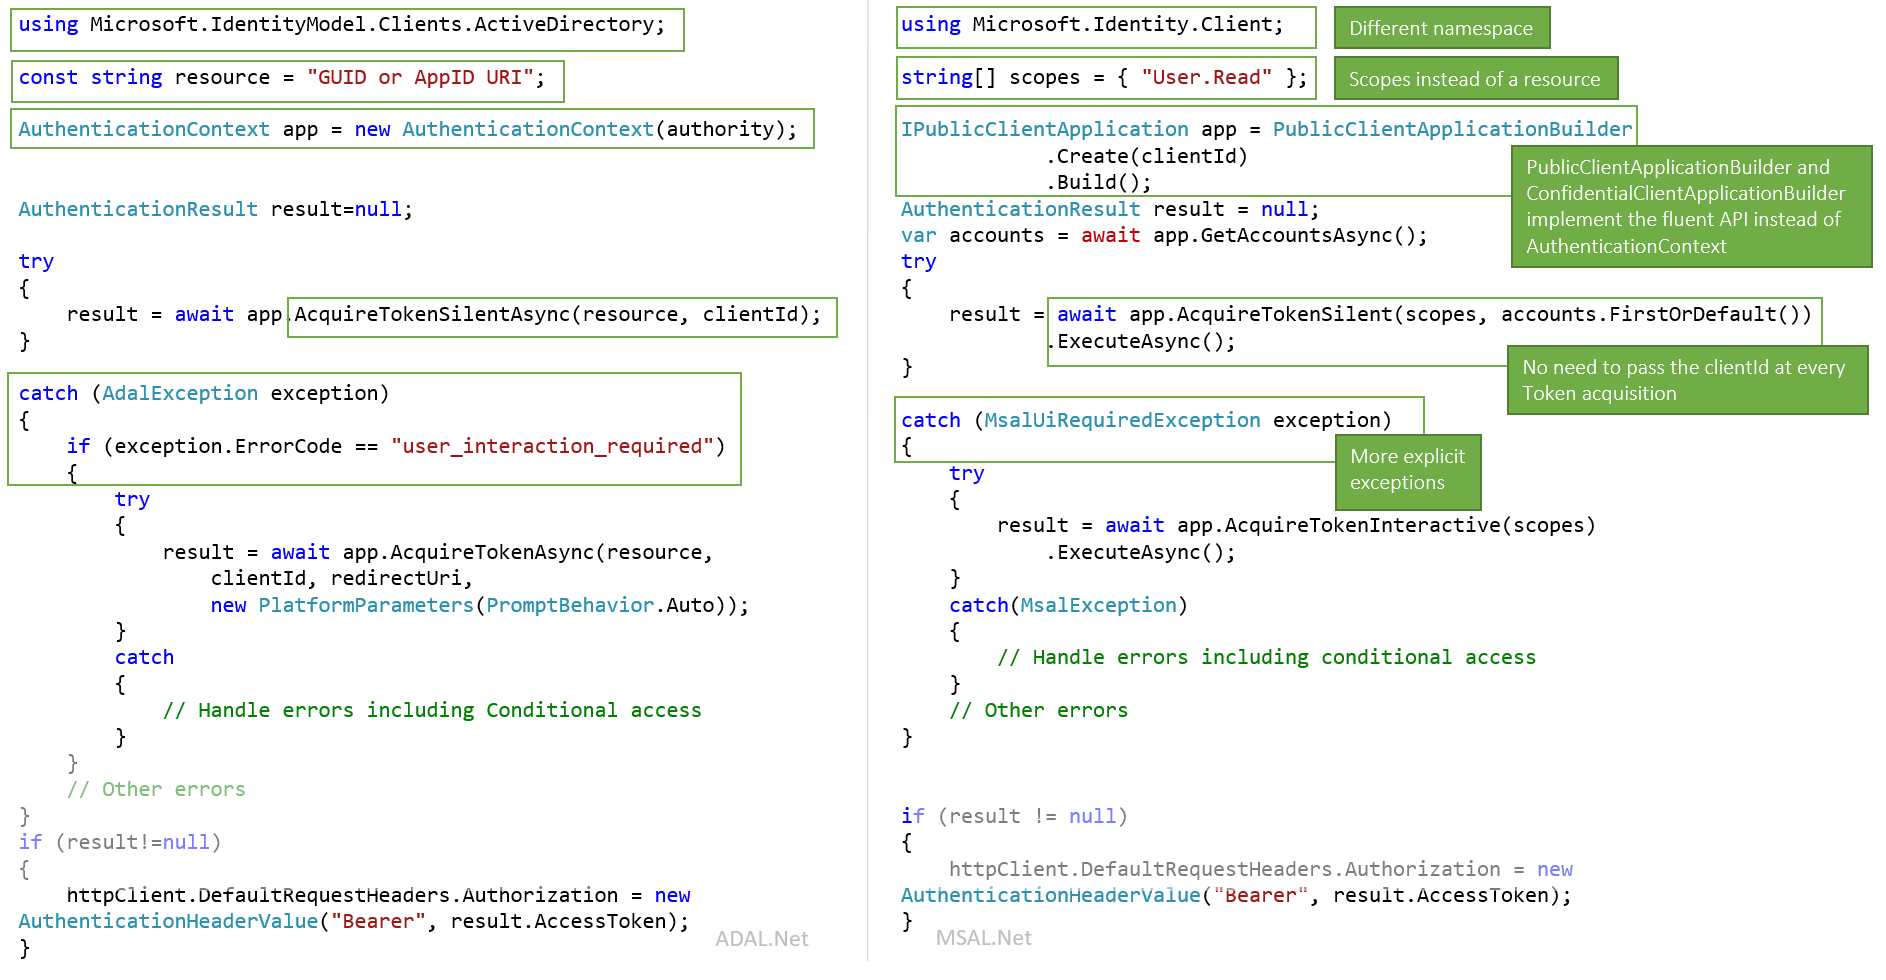 Screenshot showing some of the differences between ADAL.NET and MSAL.NET for a public client application.